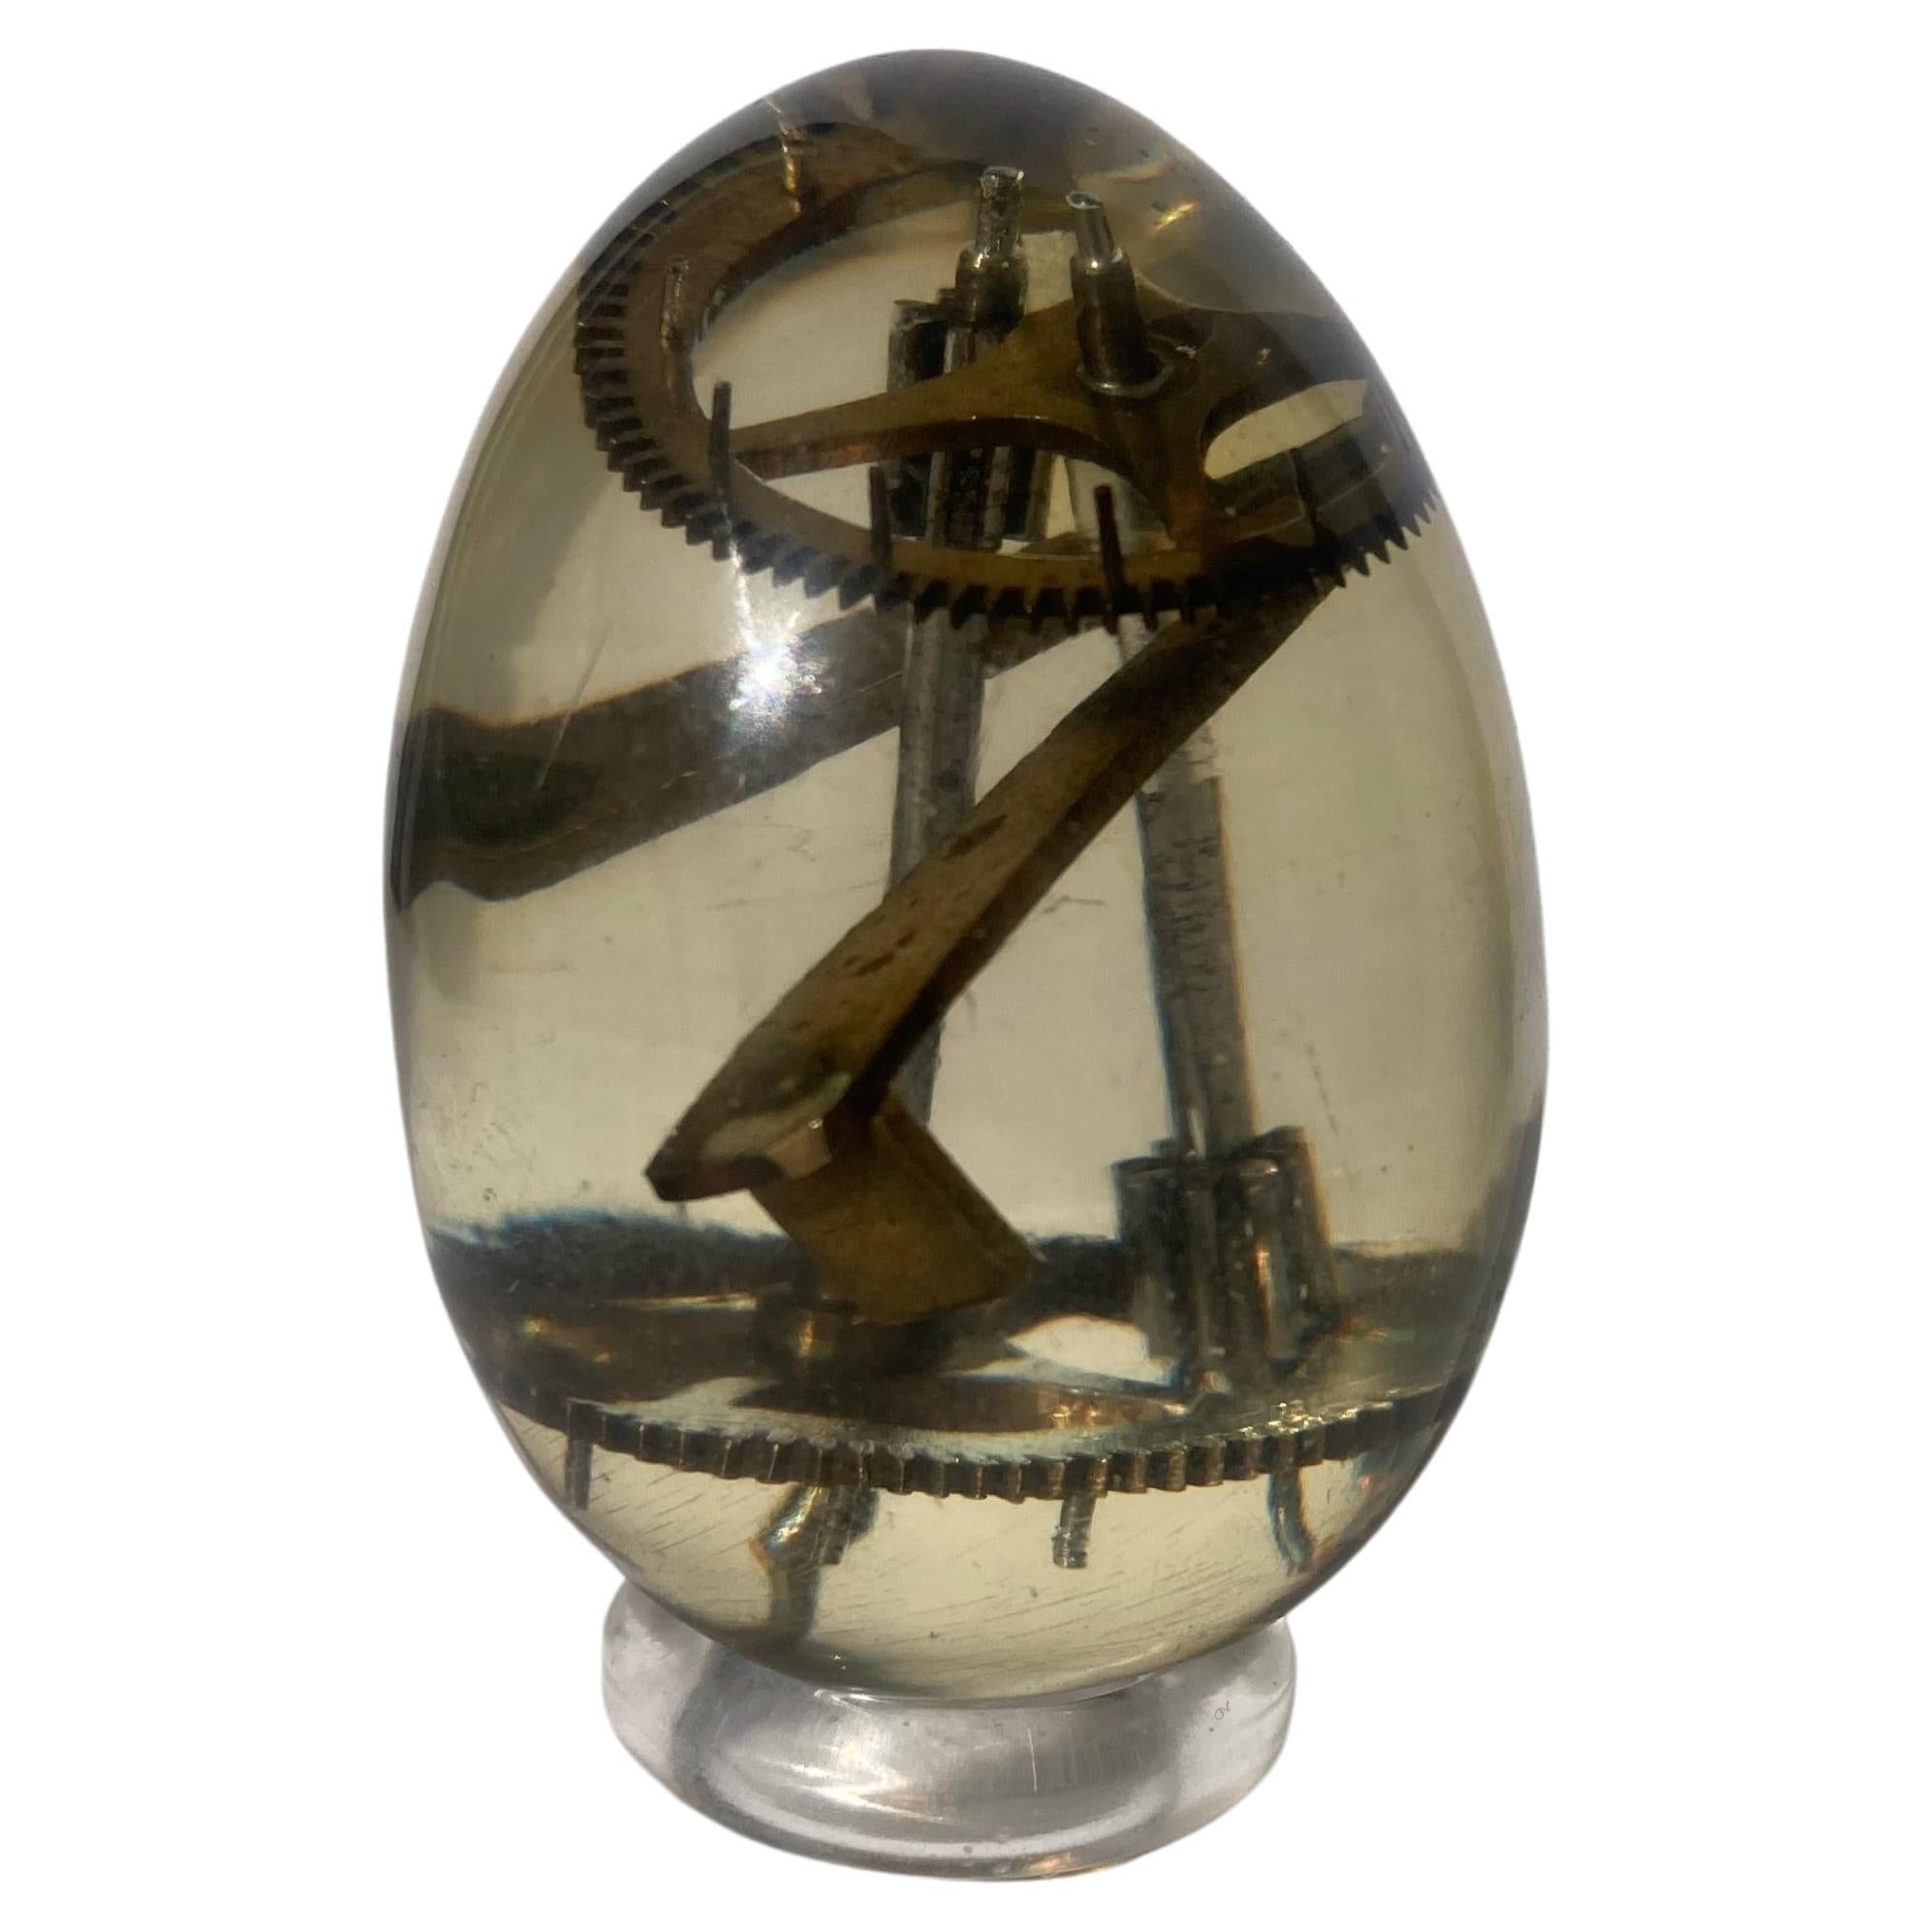 Egg with Clock Parts on Pierre GIRAUDON  Sculpture / Ornement / Presse-papiers